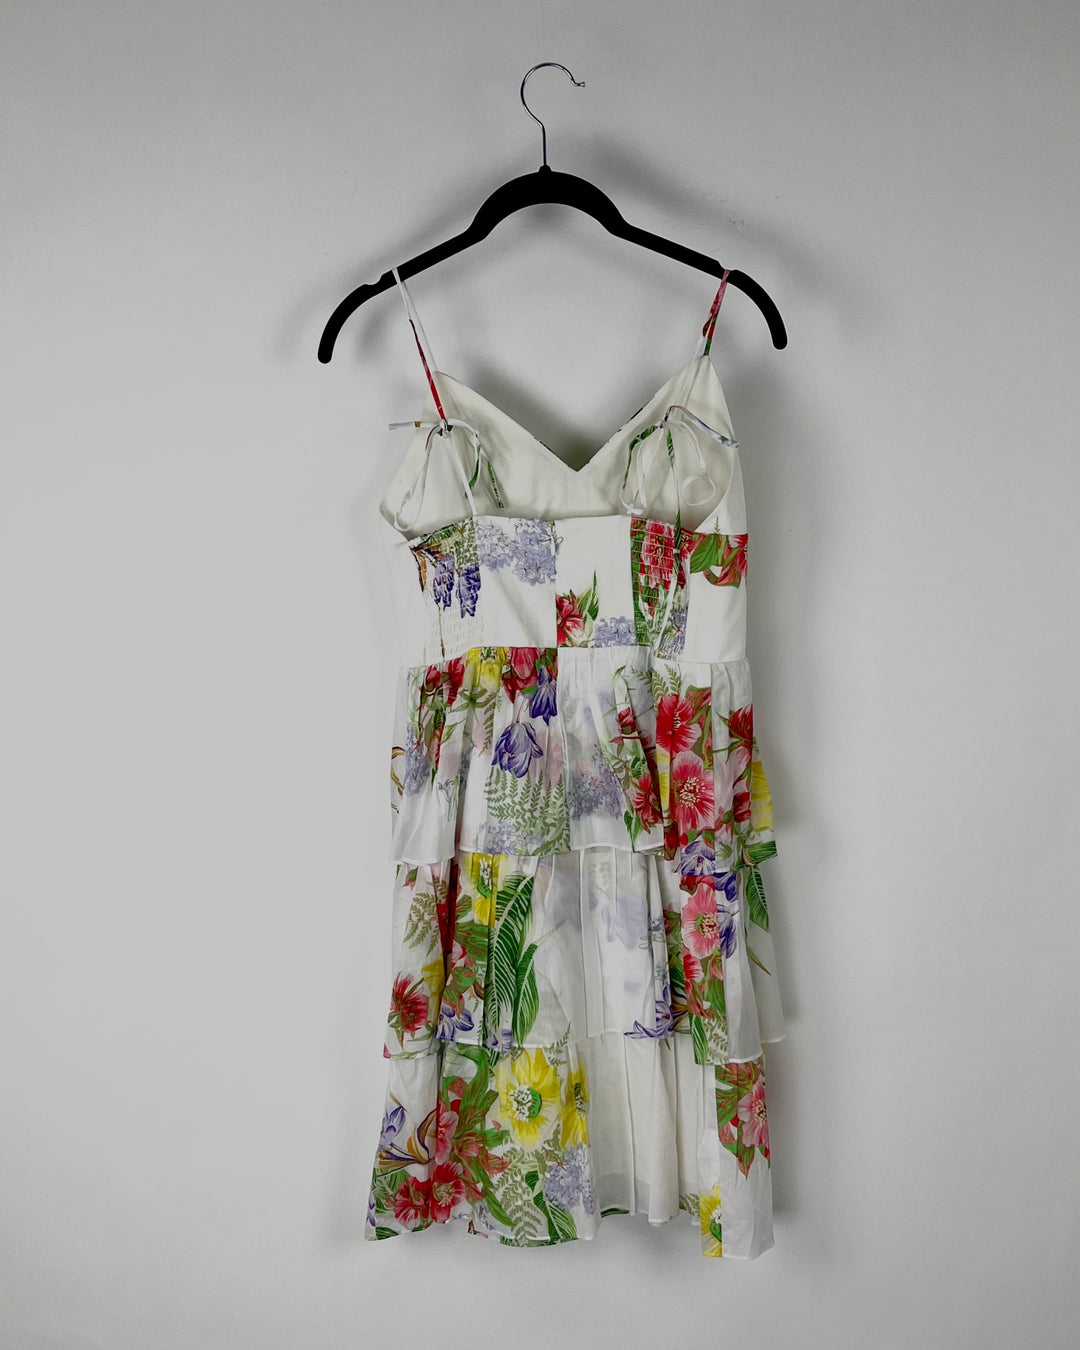 Floral Ruffle Dress - Size 4-6